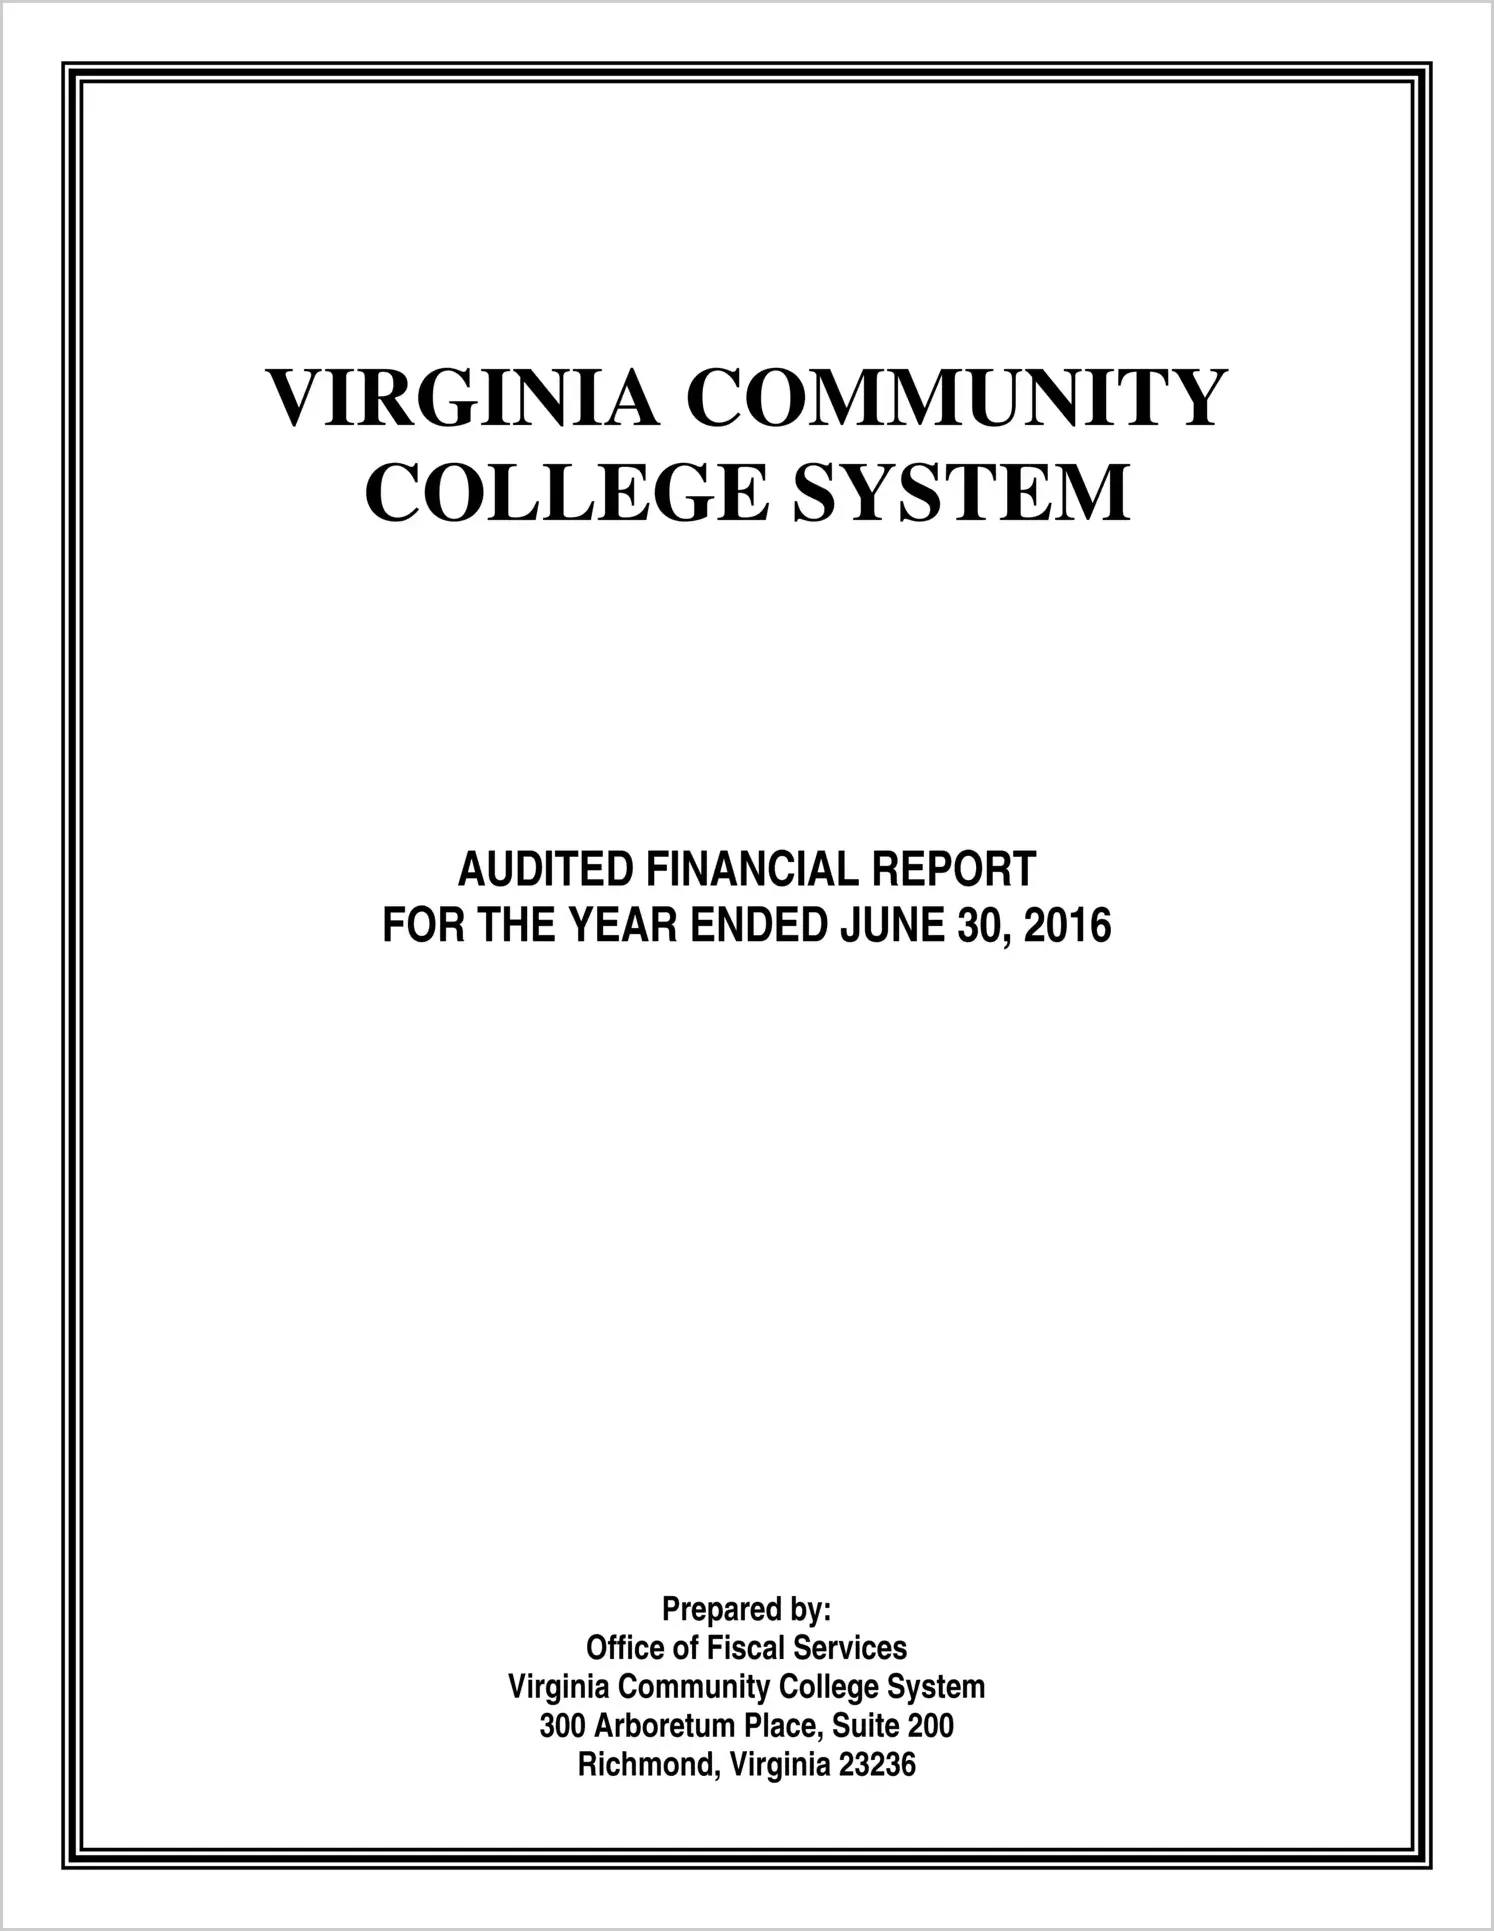 Virginia Community College System Financial Statements for year Ended June 30, 2016